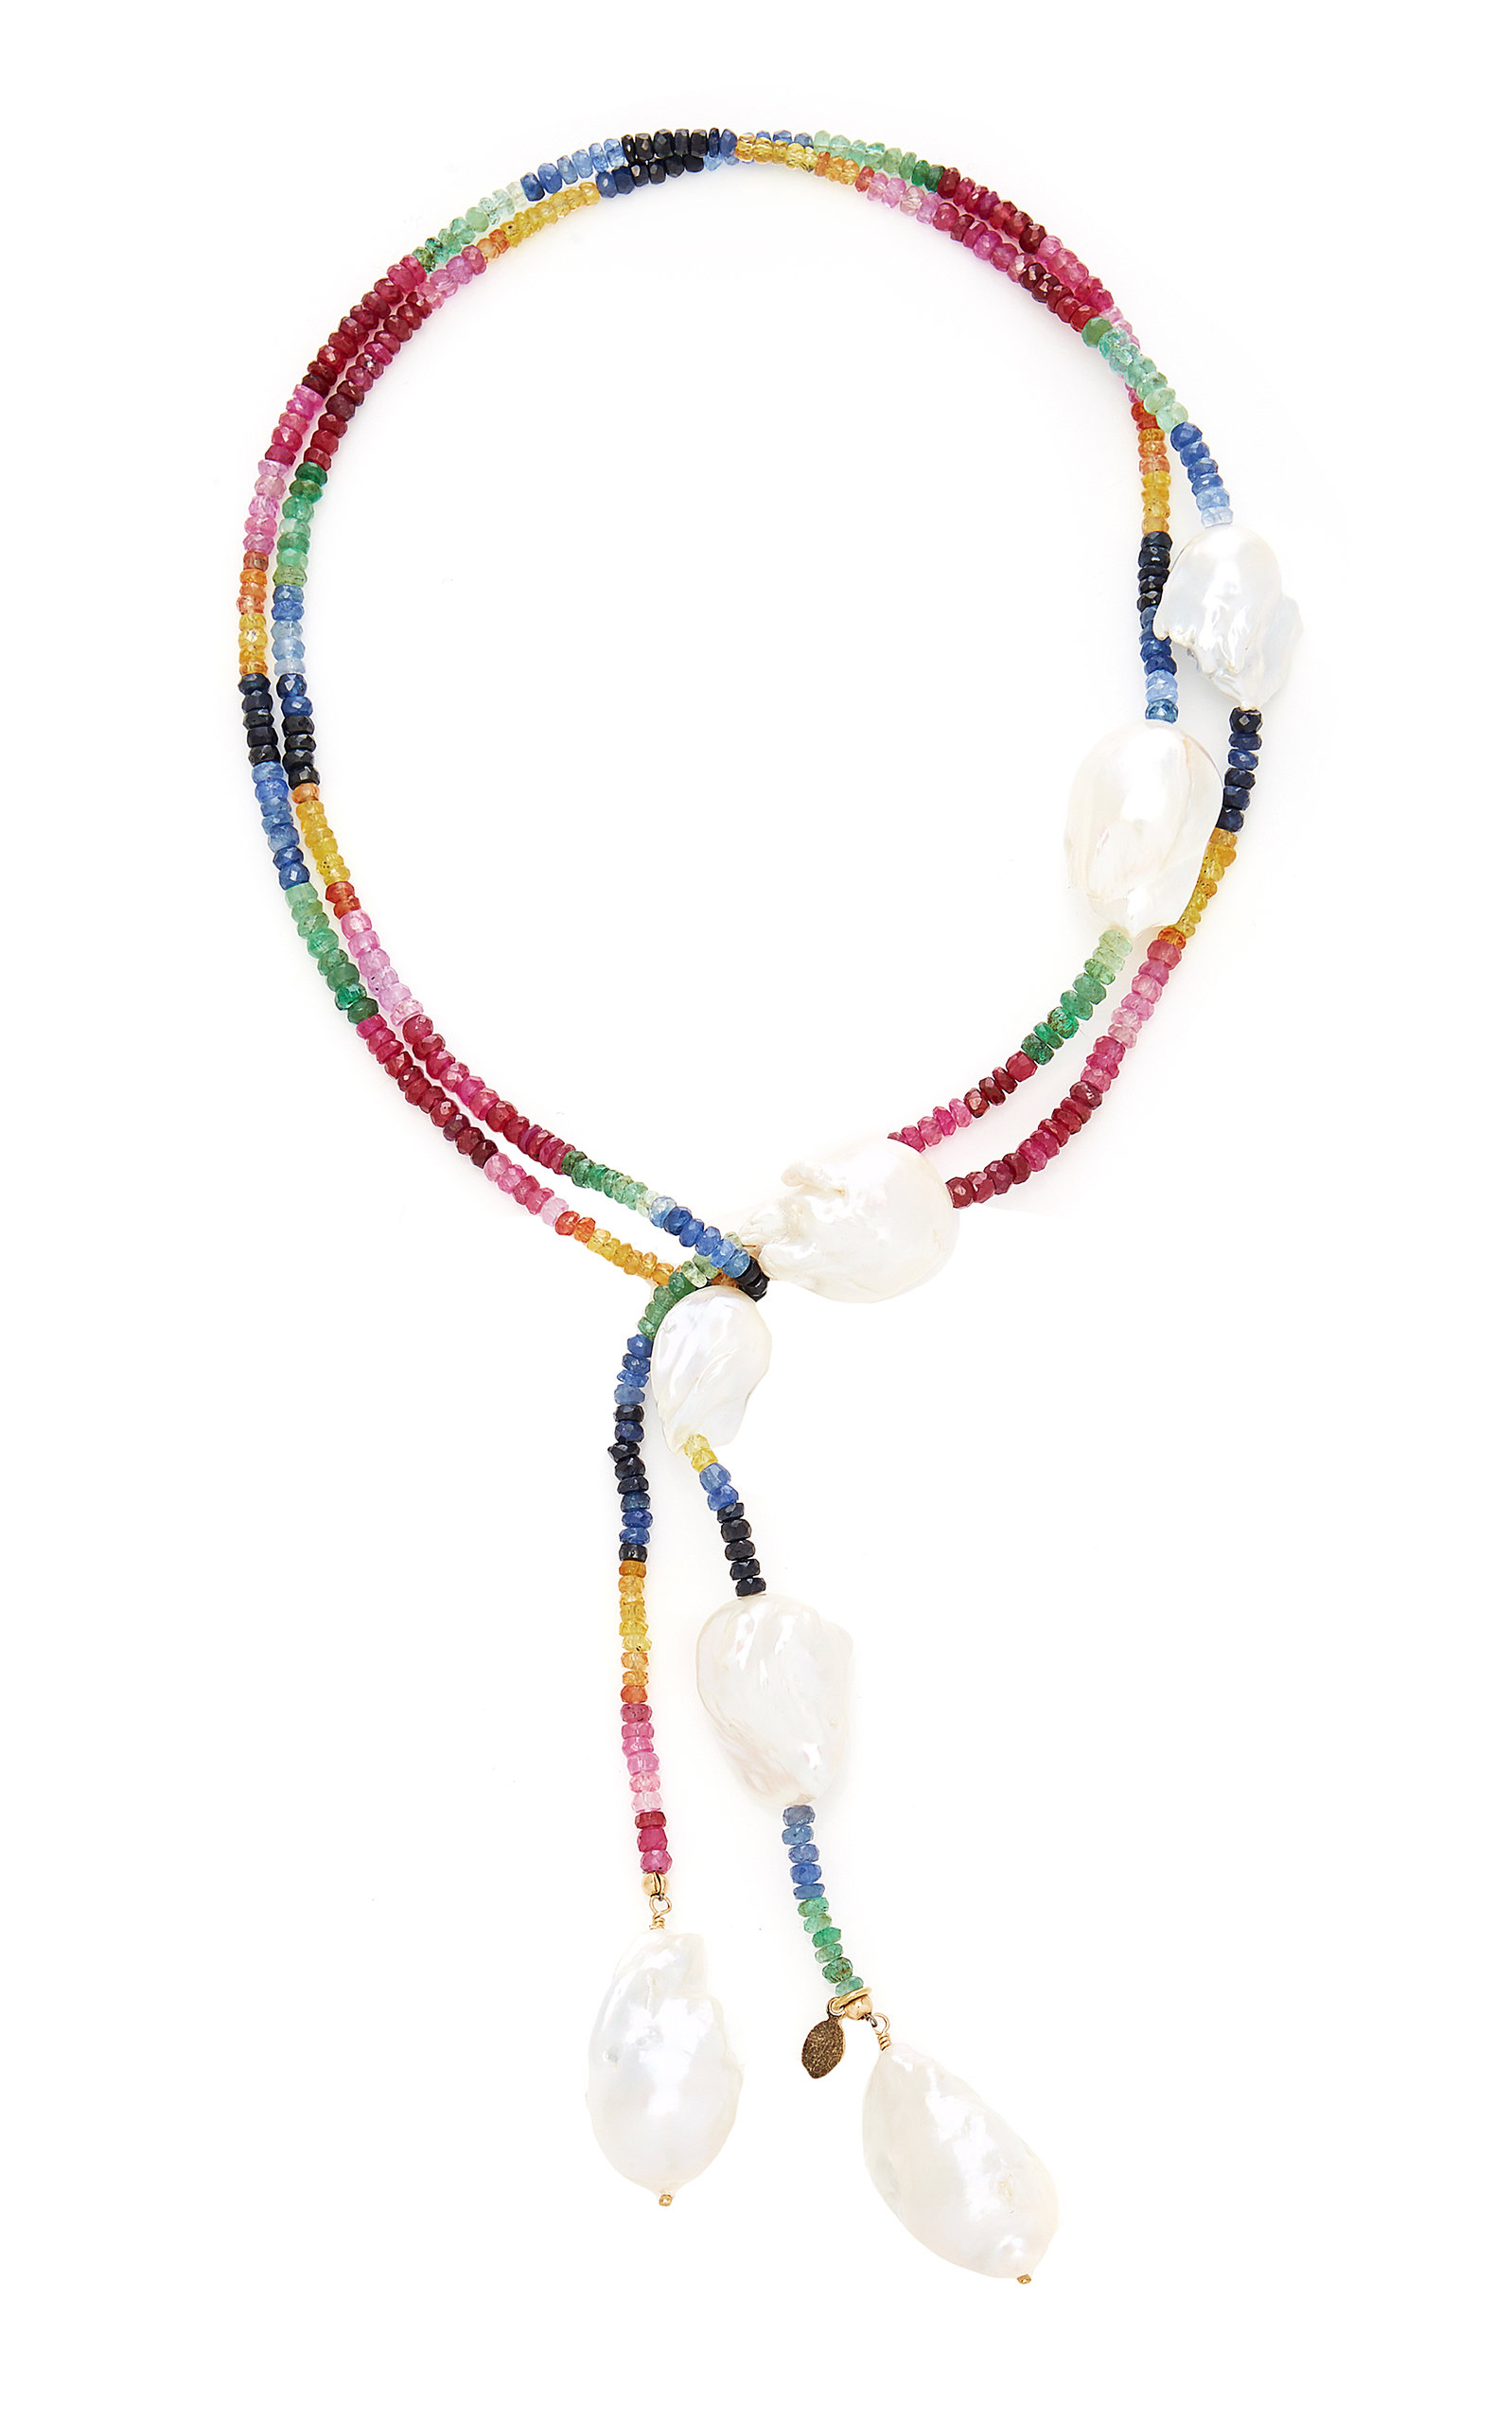 Joie DiGiovanni Women's Gold-Filled Ruby; Emerald and Sapphire and Pearl Necklace